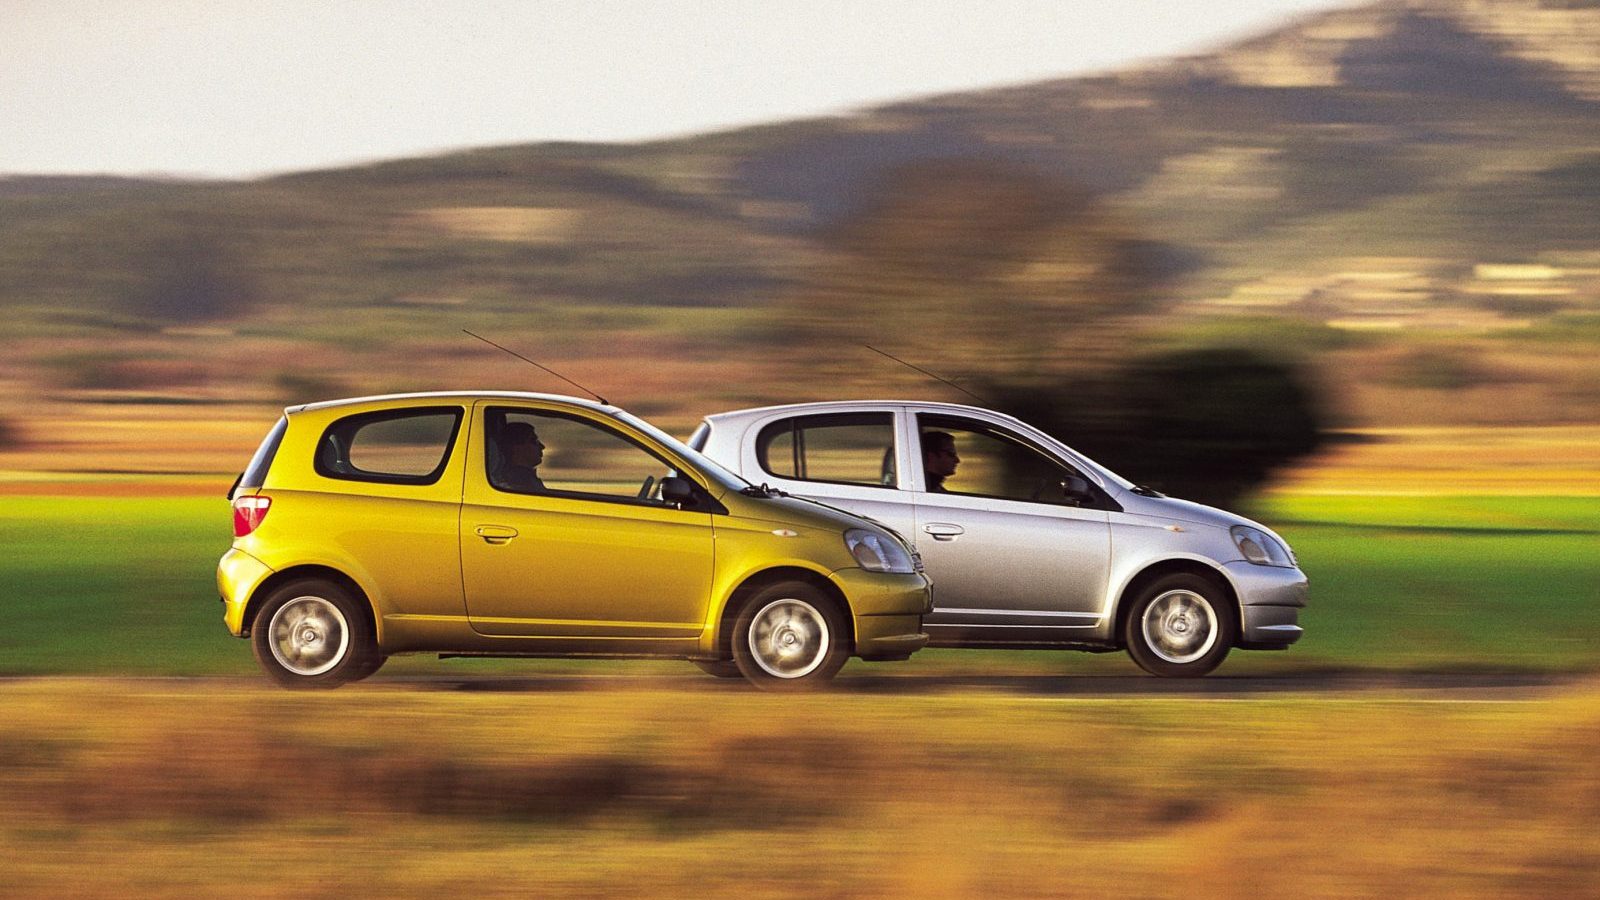 Toyota Yaris history: our super supermini - Official Toyota UK